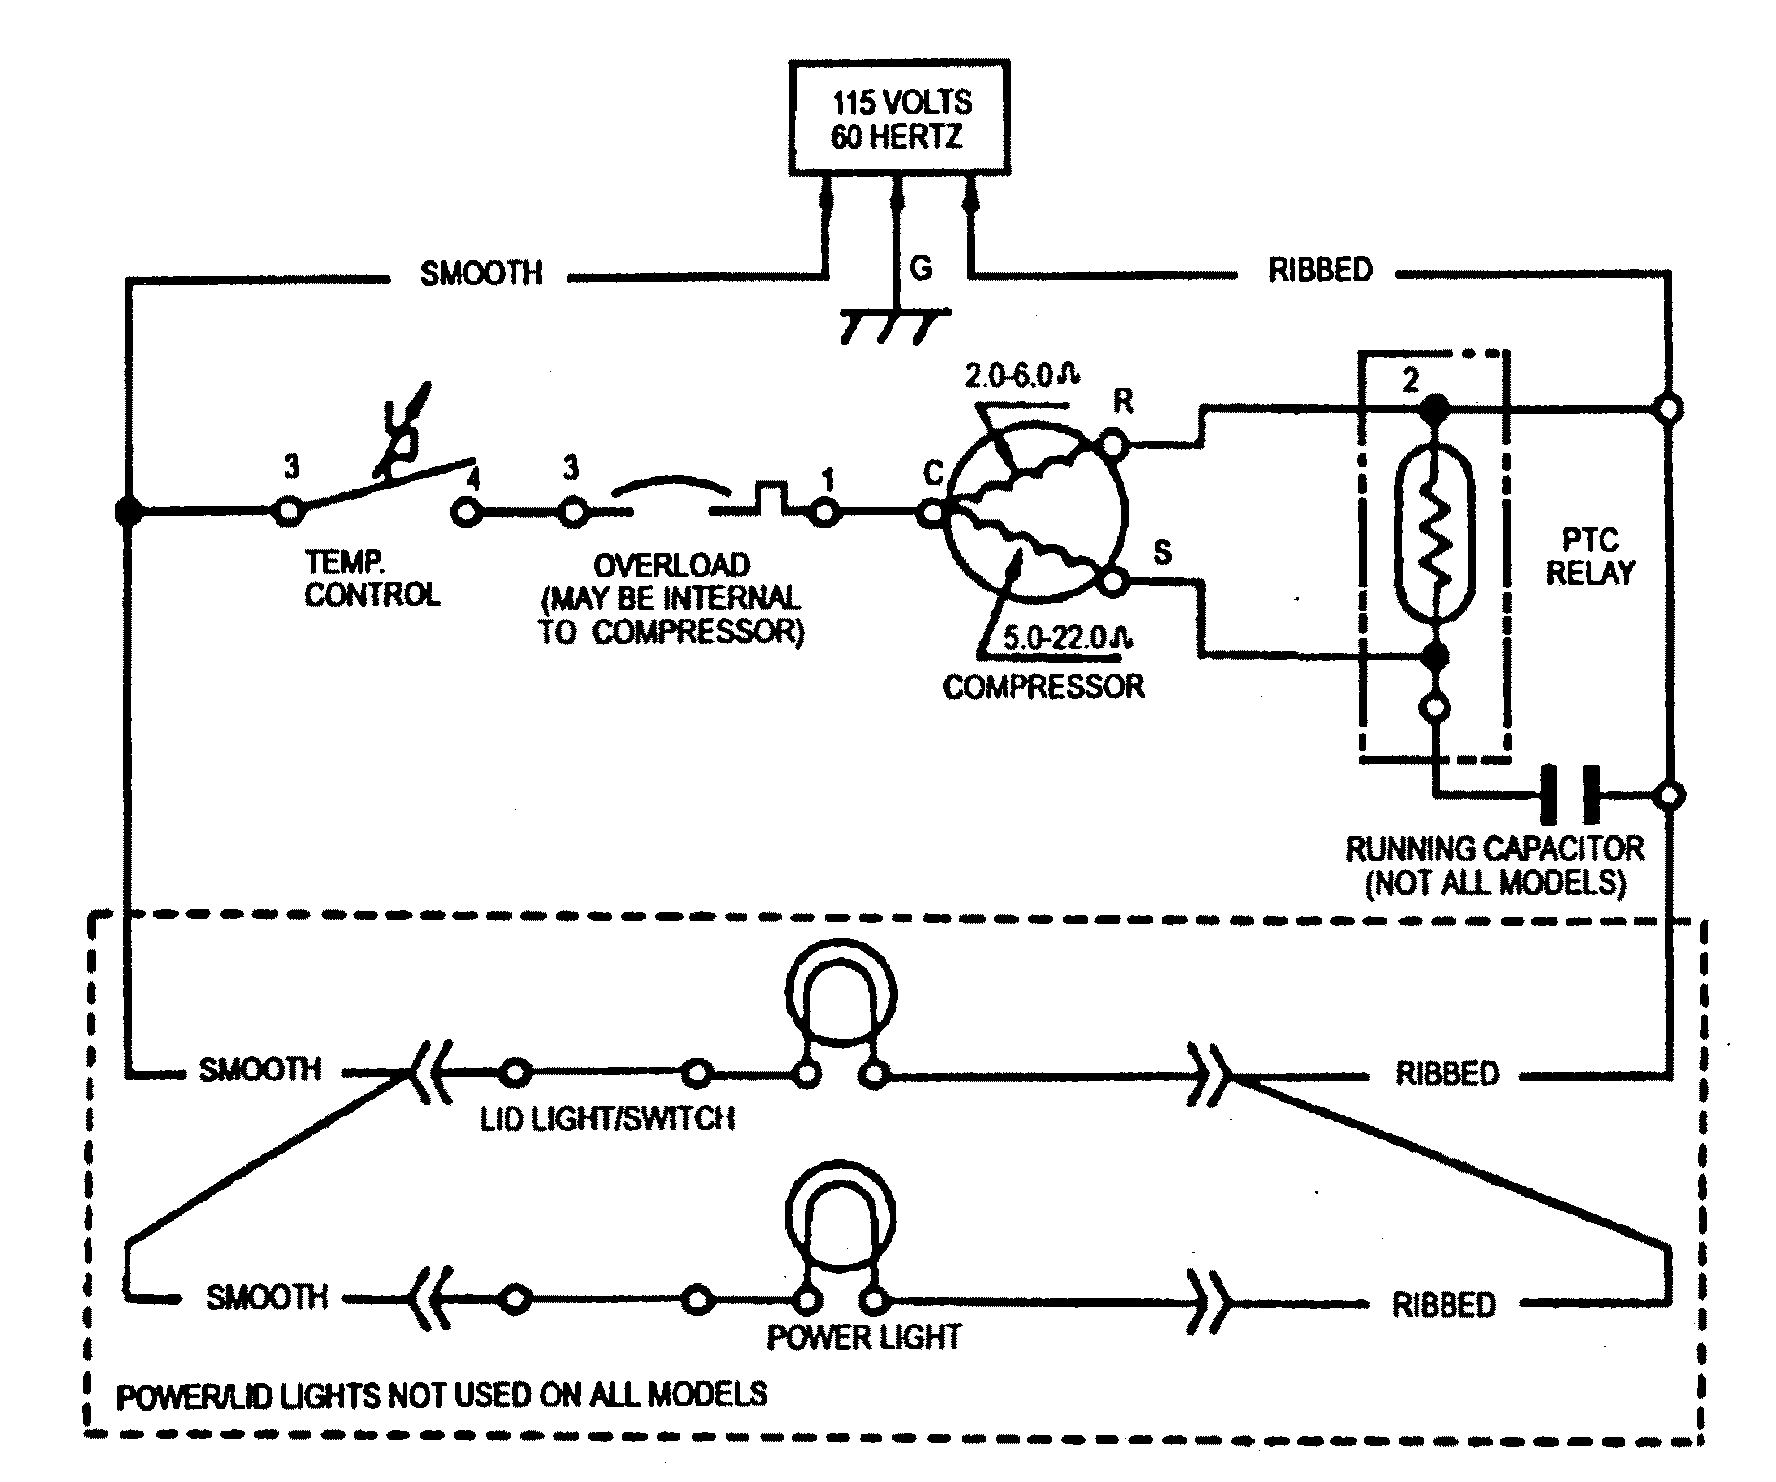 True T 72F Wiring Diagram from c.searspartsdirect.com